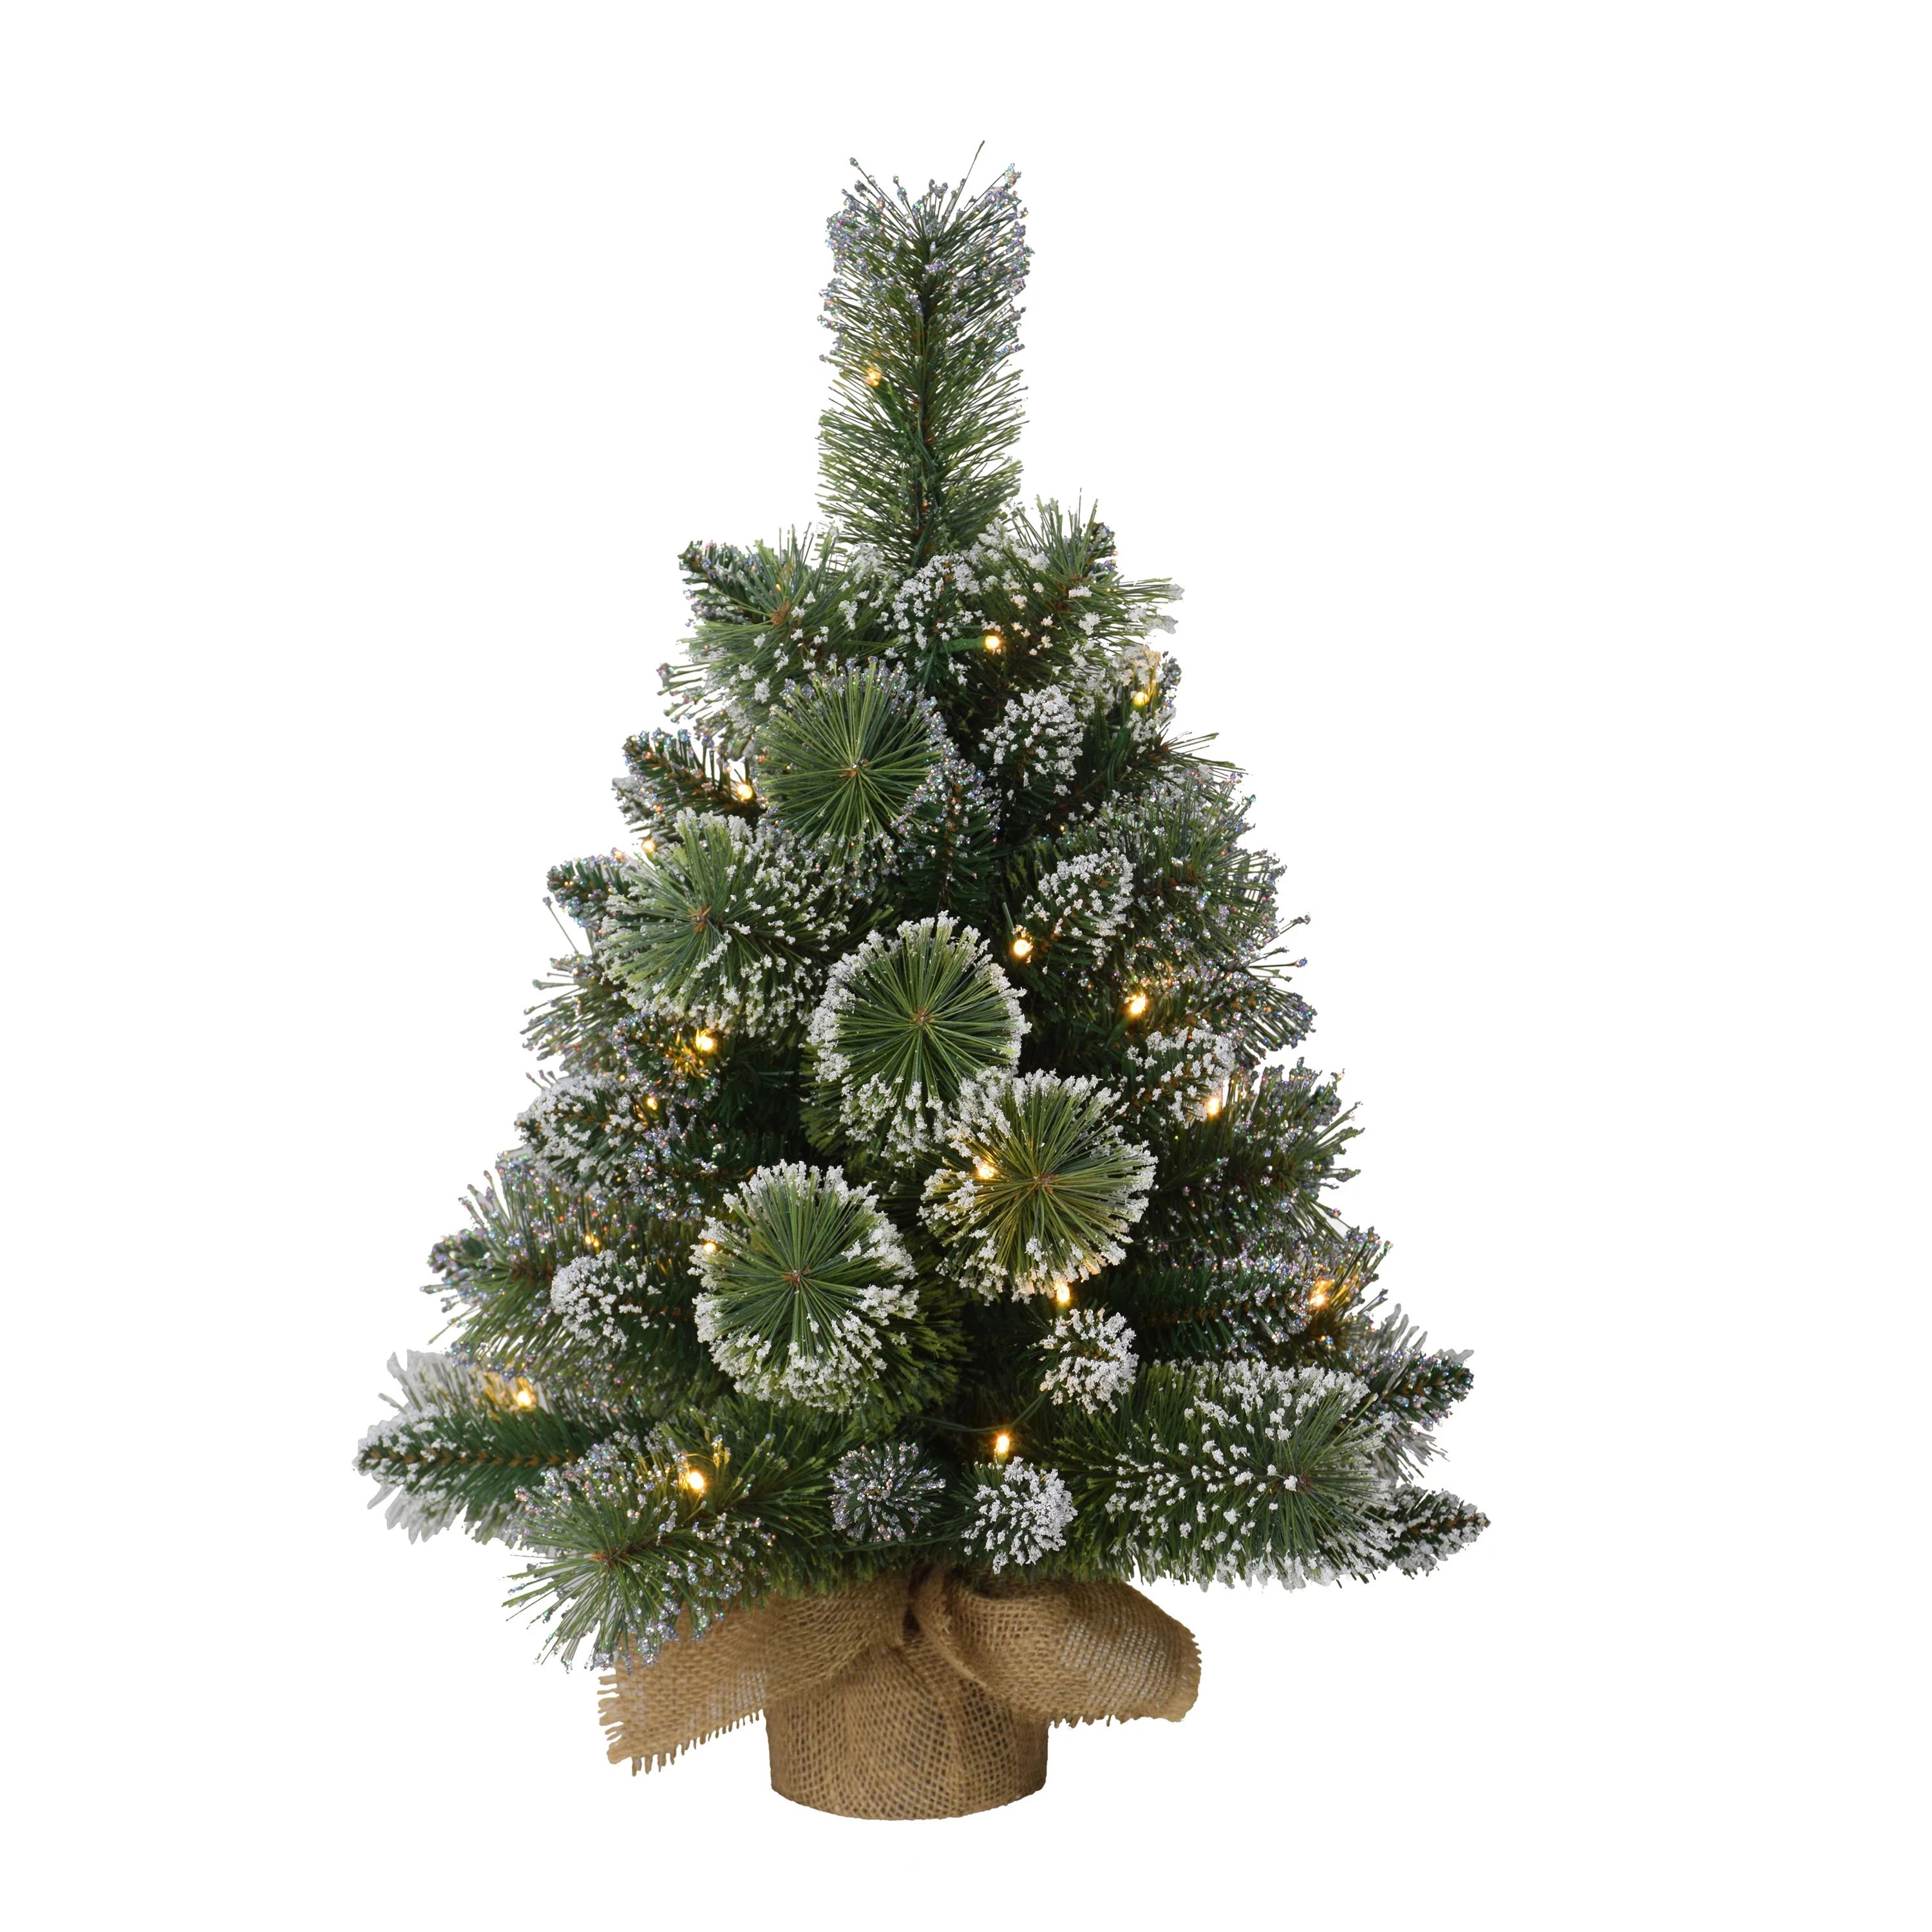 Pre-Lit 2' Table Top Artificial Christmas Tree with 35 Lights in Tan Sac, Green | Walmart (US)